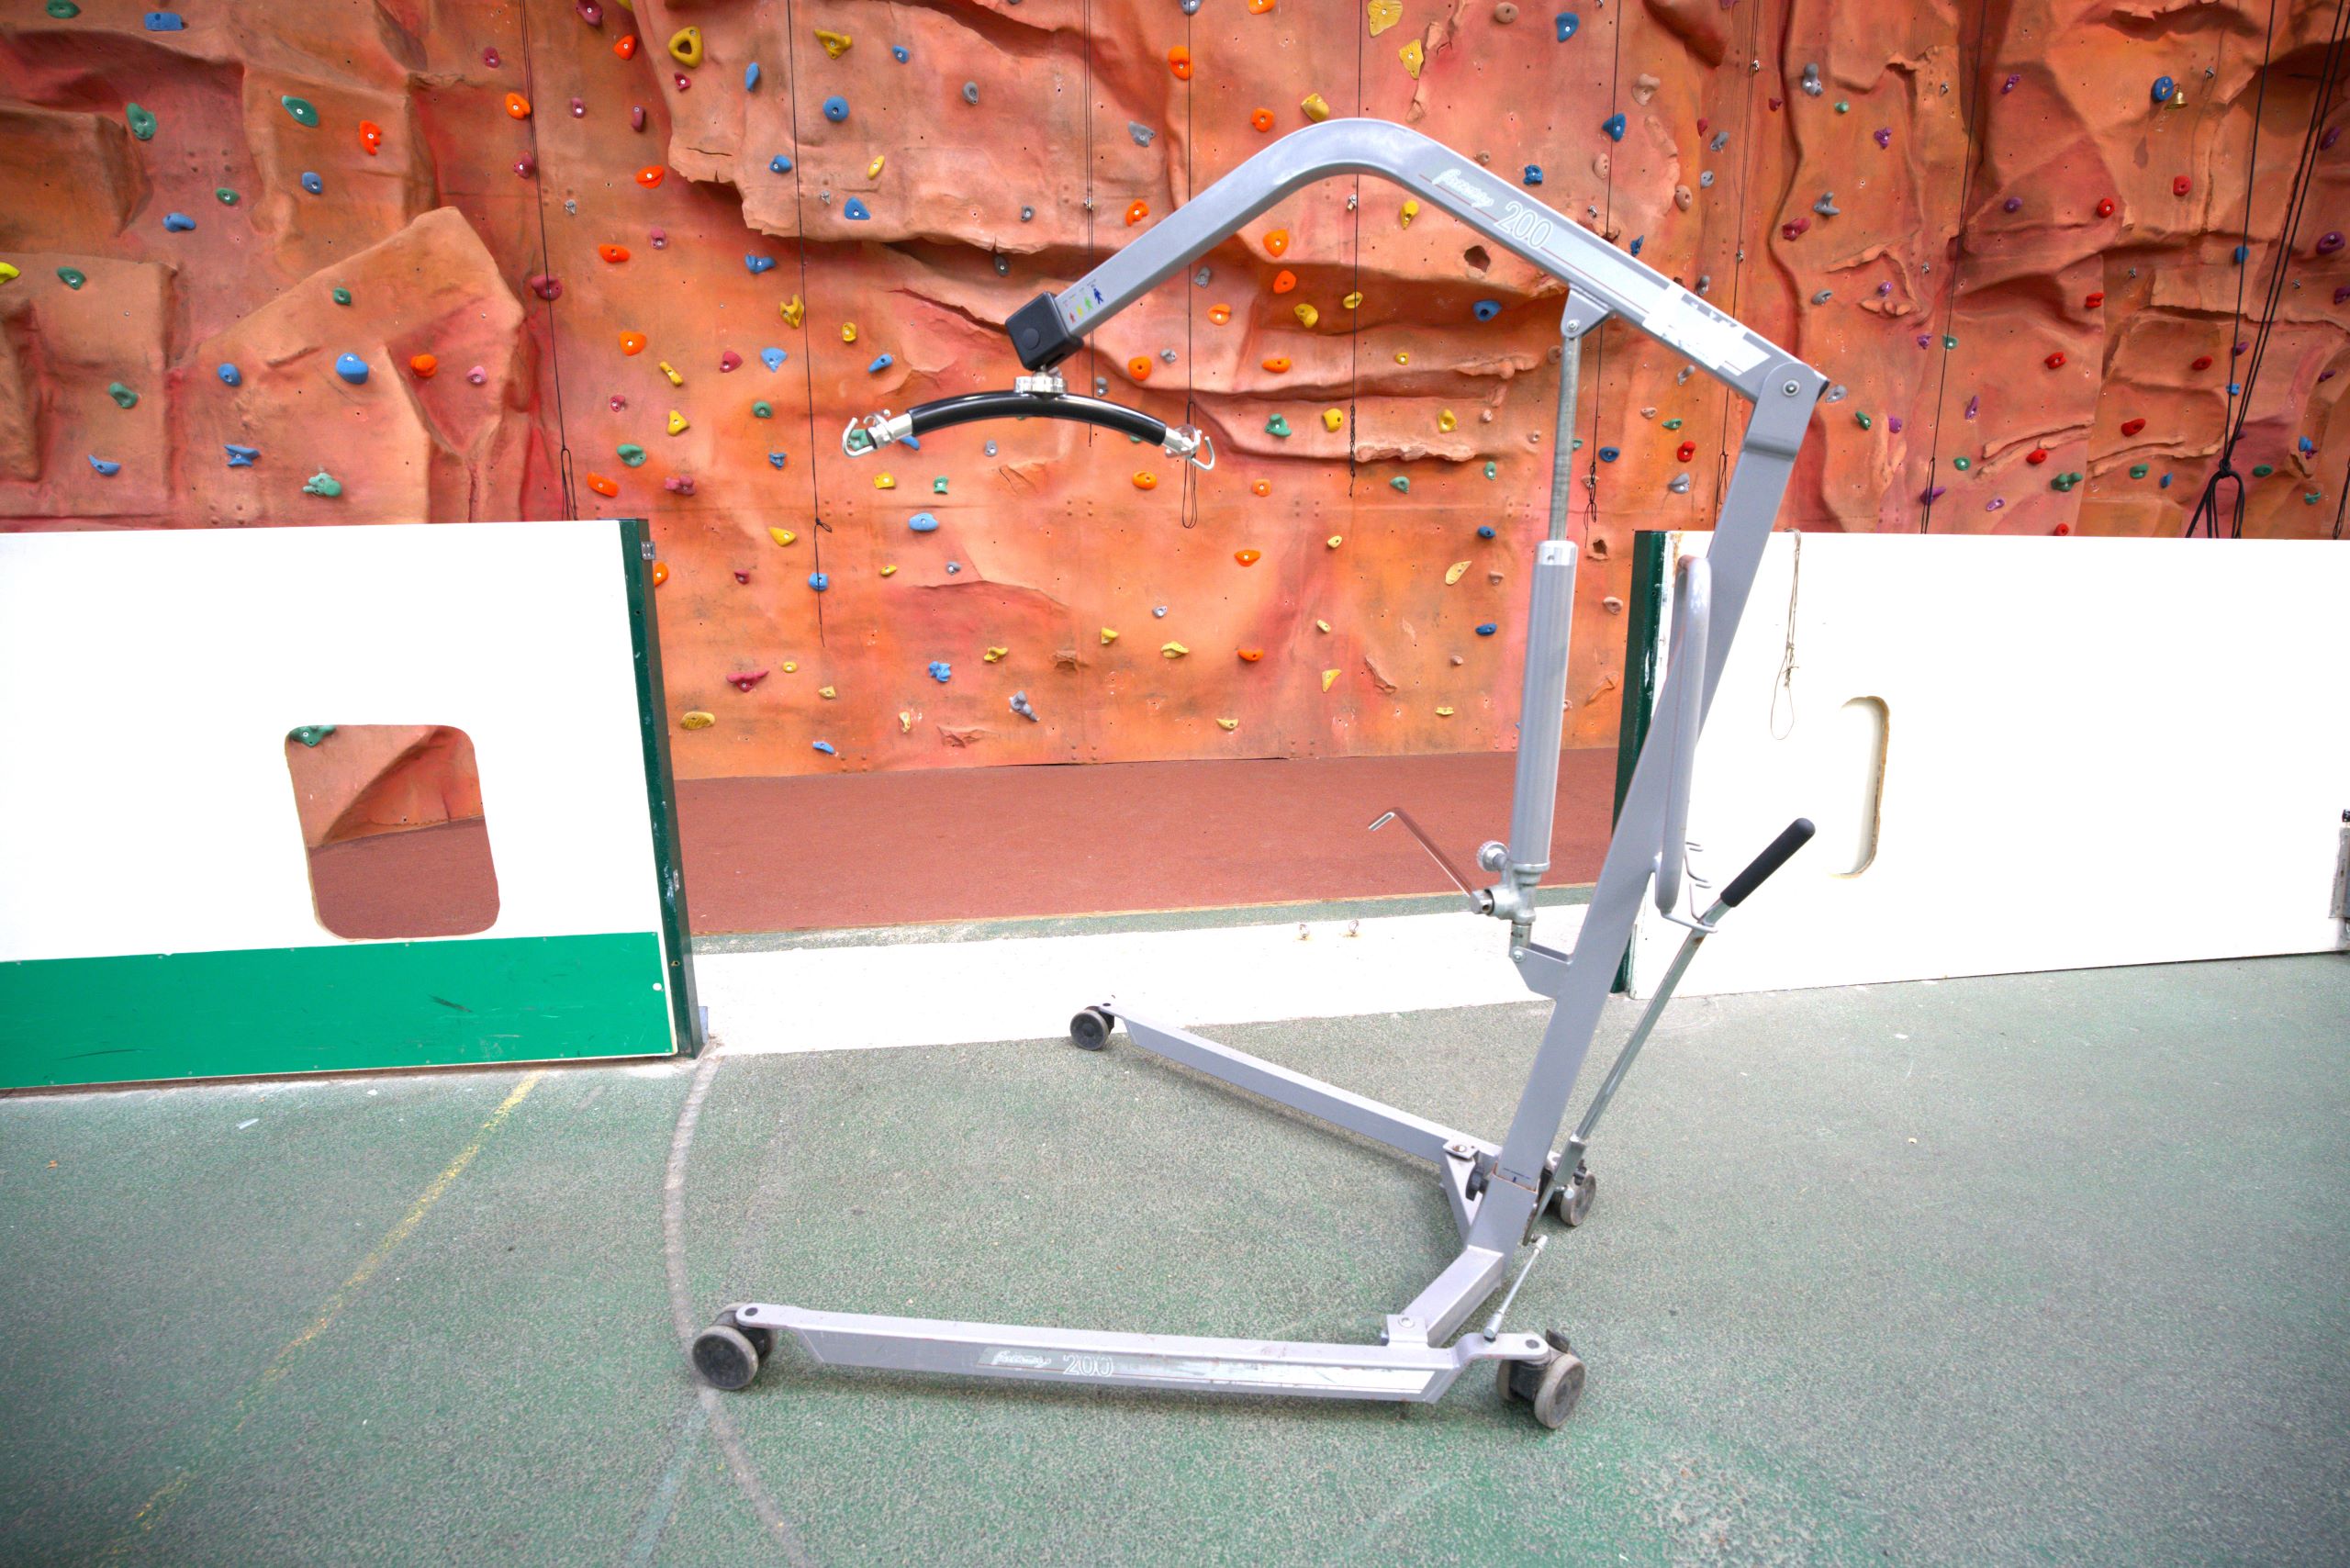 A silver metal mobile hoist in front of the climbing wall with a black T section with hooks on.